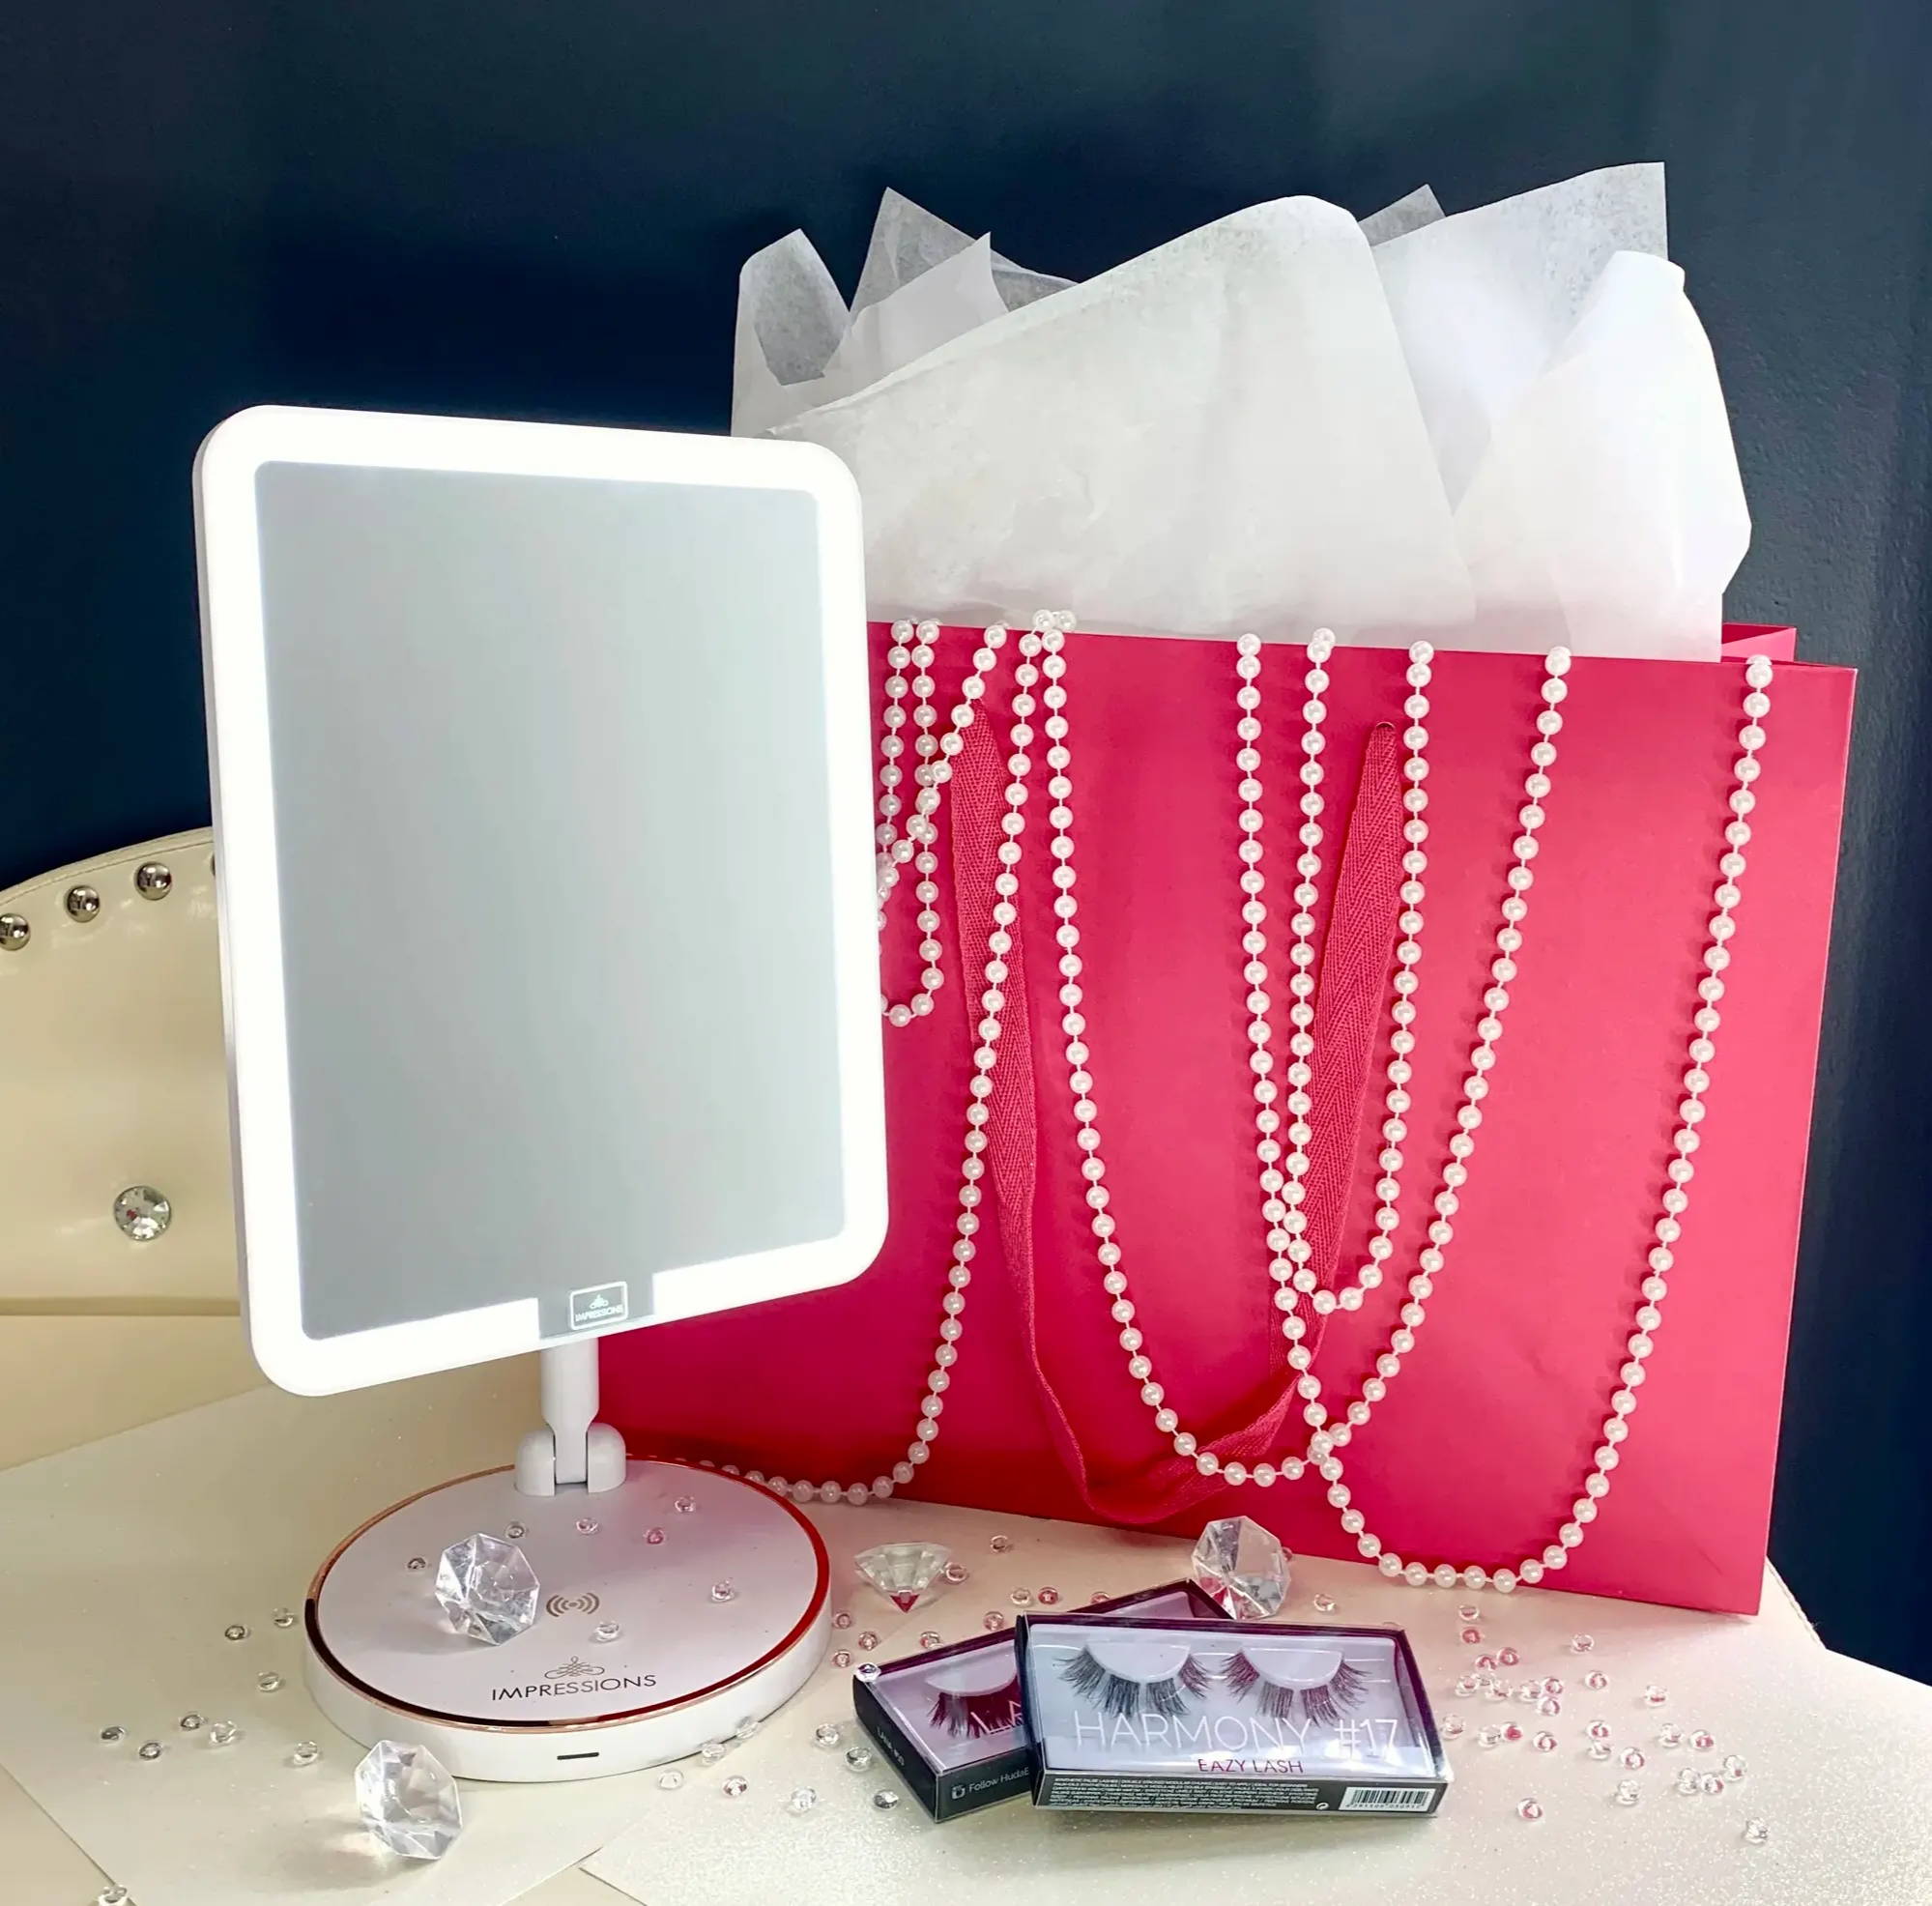 the white royale petit with a pink gift bag